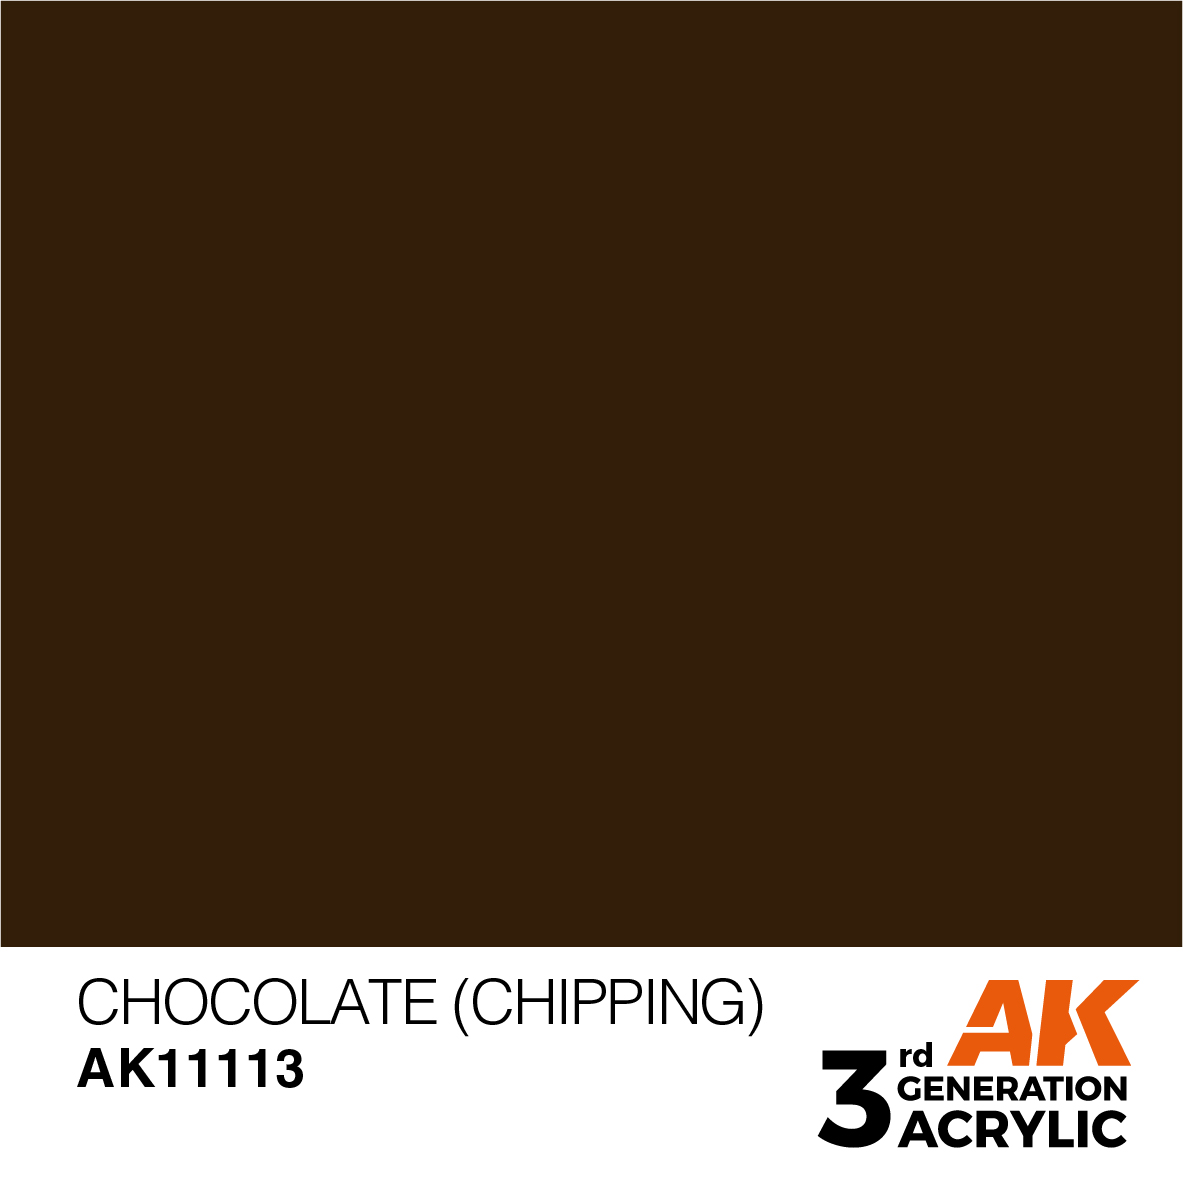 Chocolate (Chipping) - Standard